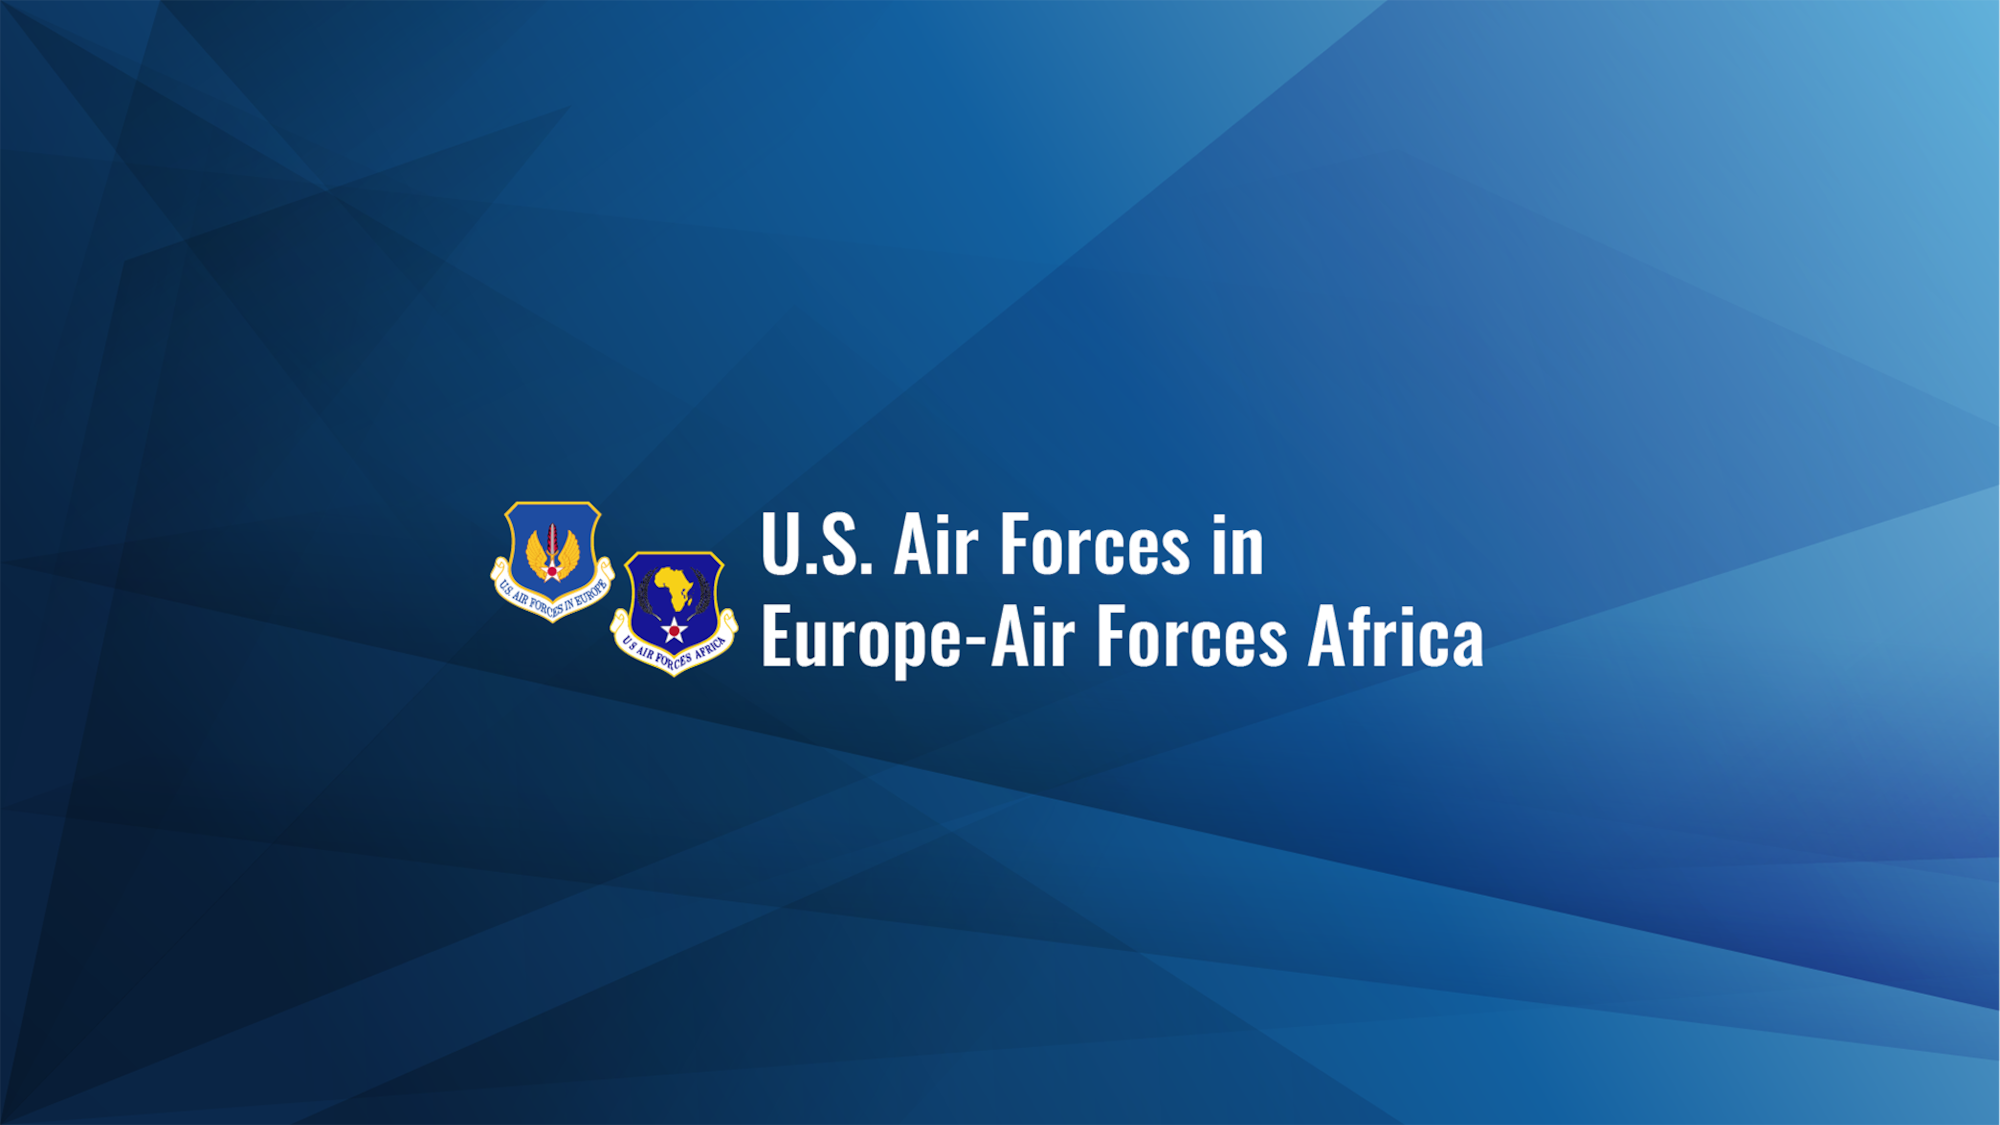 U.S. Air Forces in Europe-Air Forces Africa Rotator